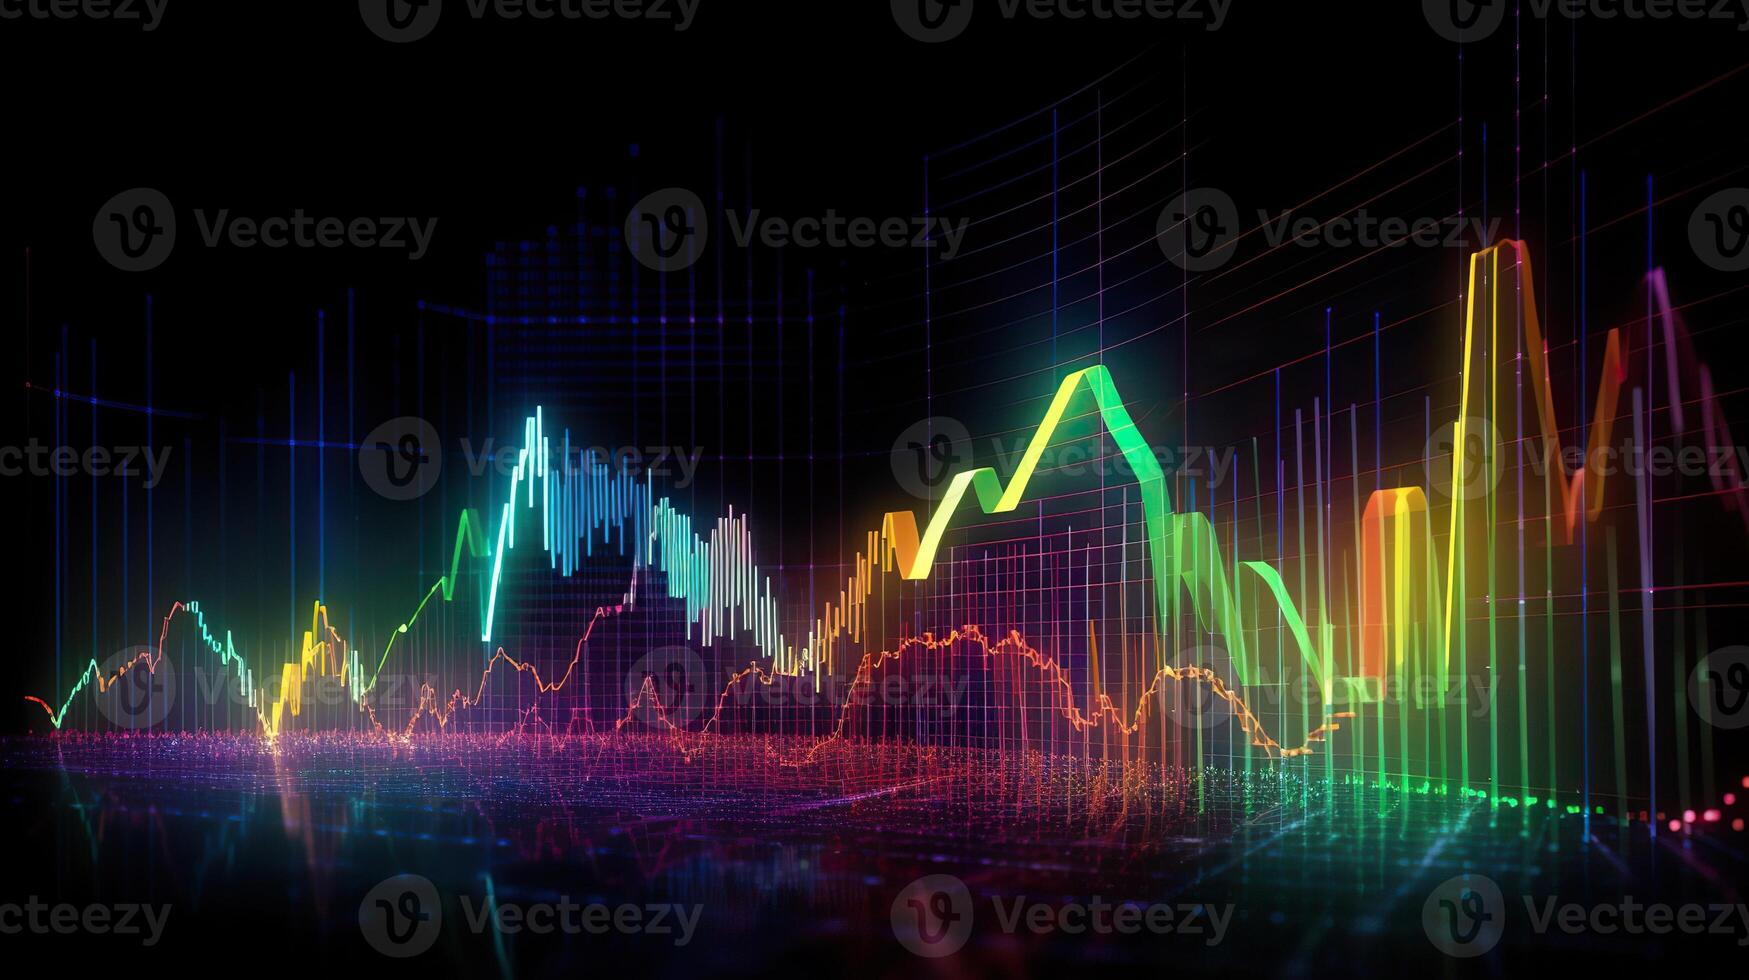 . . Finance stock forex graph marketing money trend volume income go up and down. Can be used for illustration of analysis finance statements. Graphic Art photo